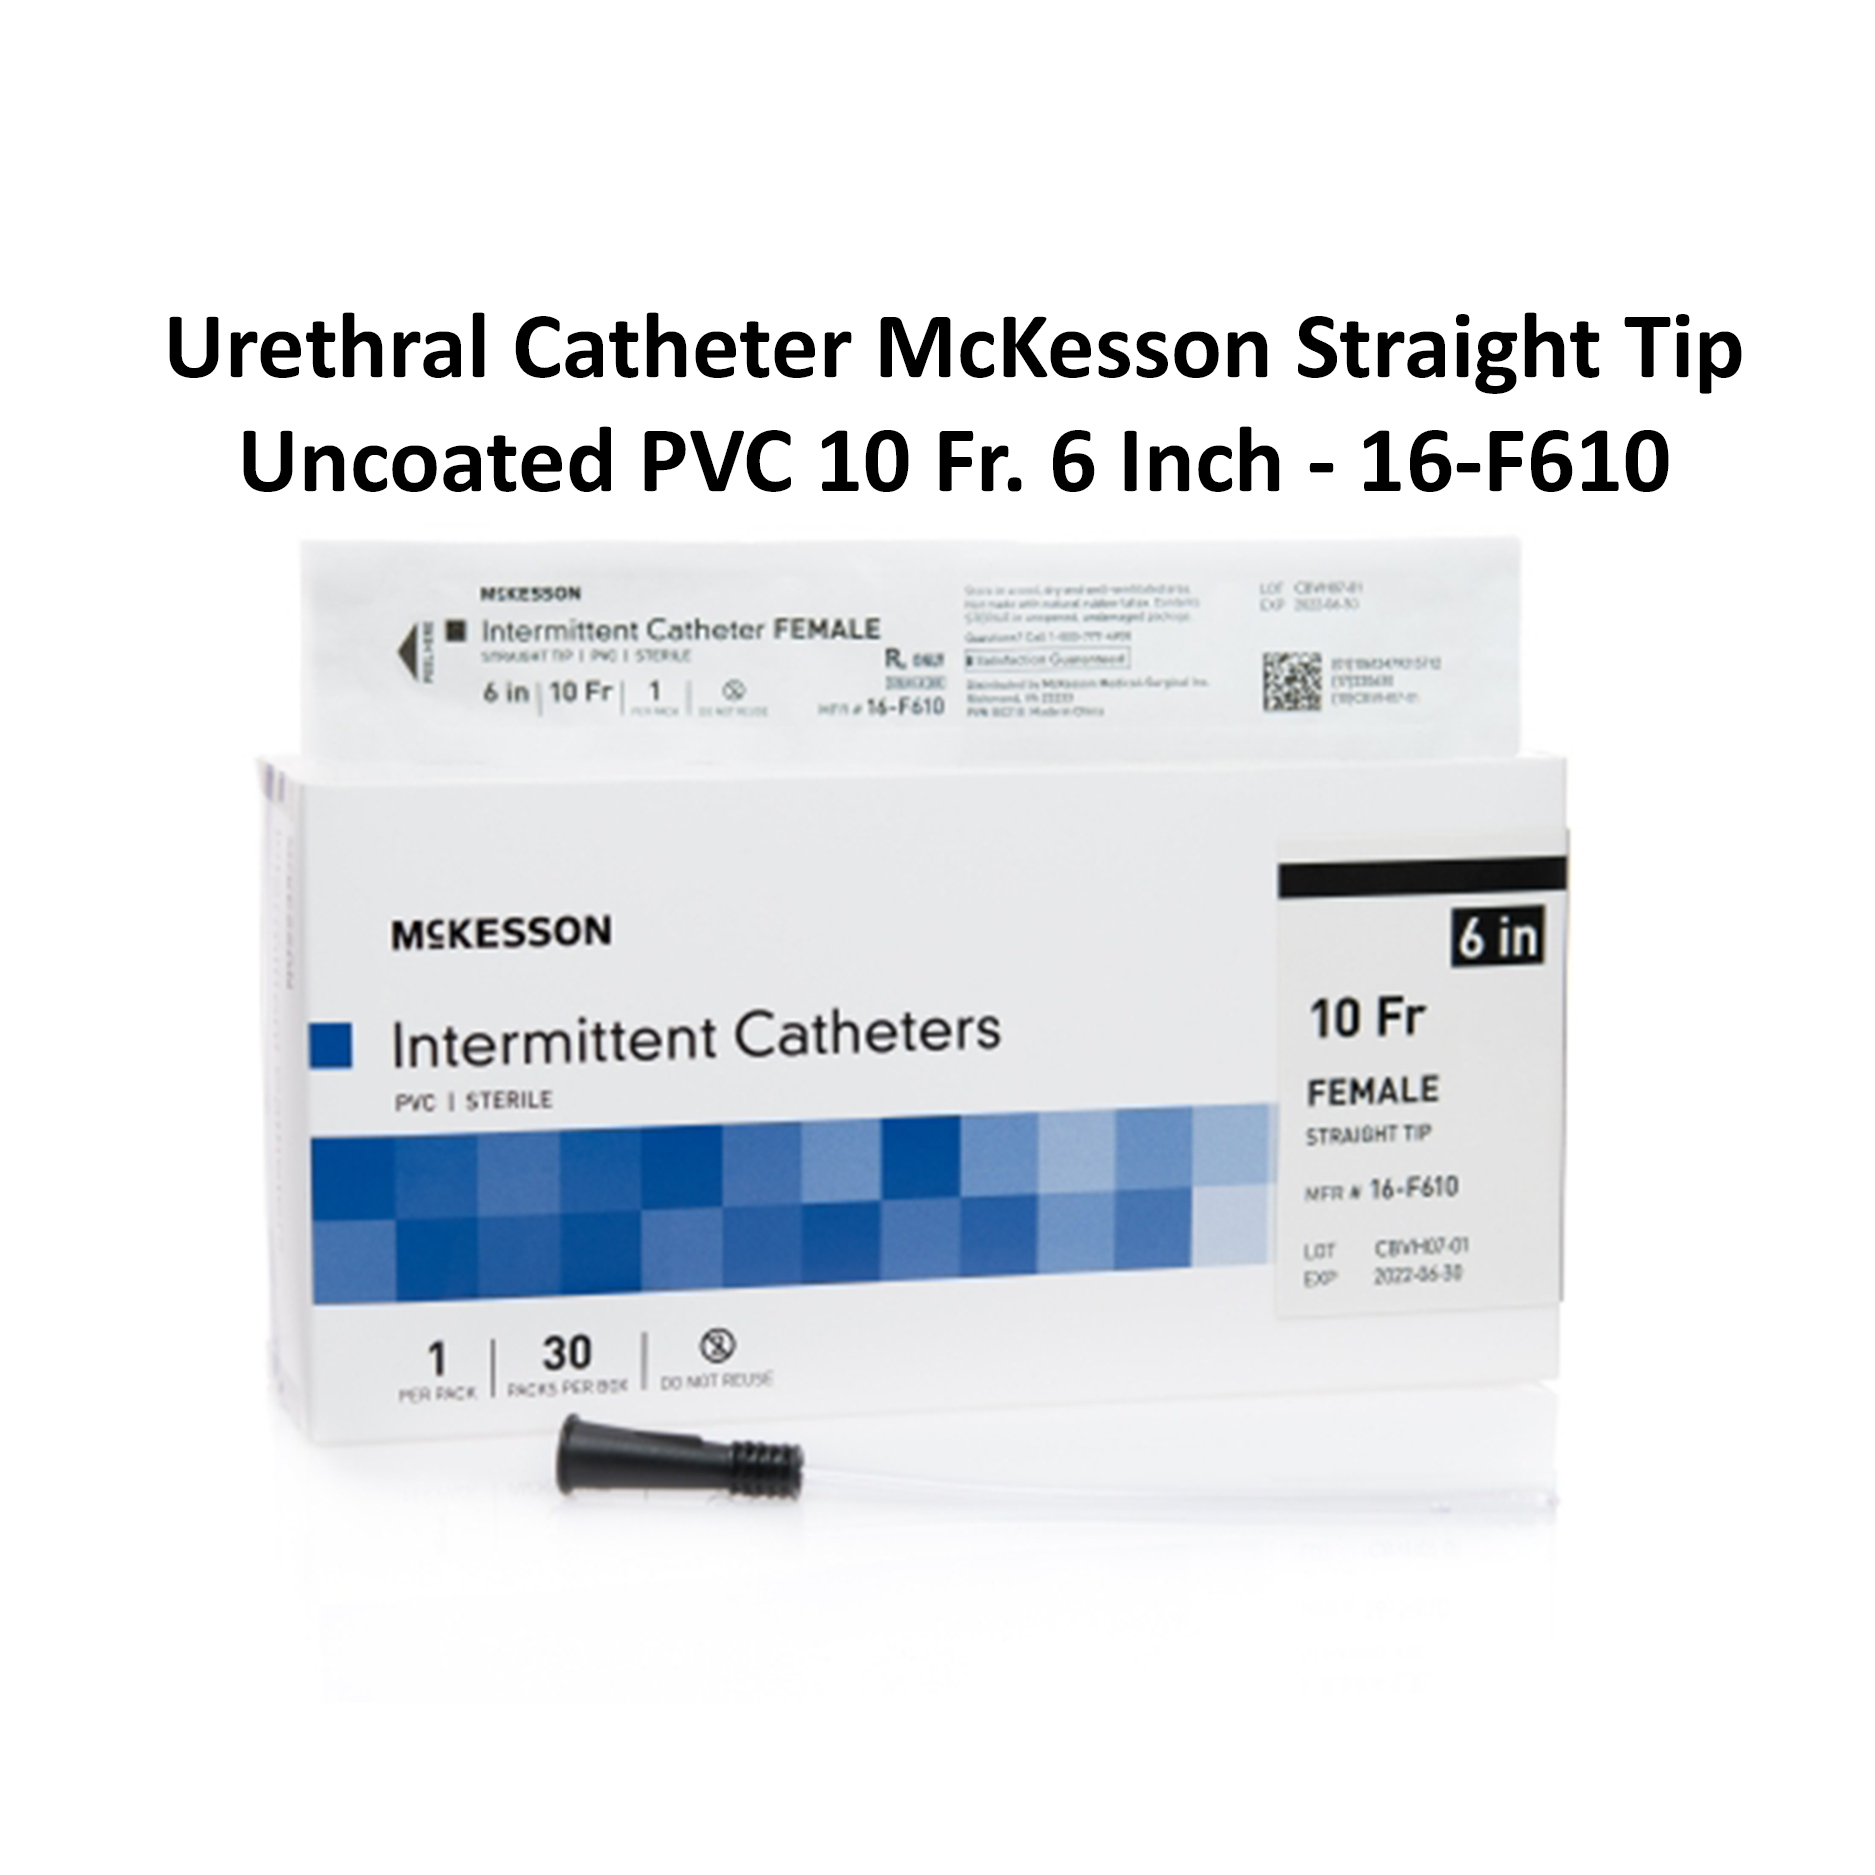 Urethral Catheter McKesson Straight Tip Uncoated PVC 10 Fr. 6 Inch - 16-F610